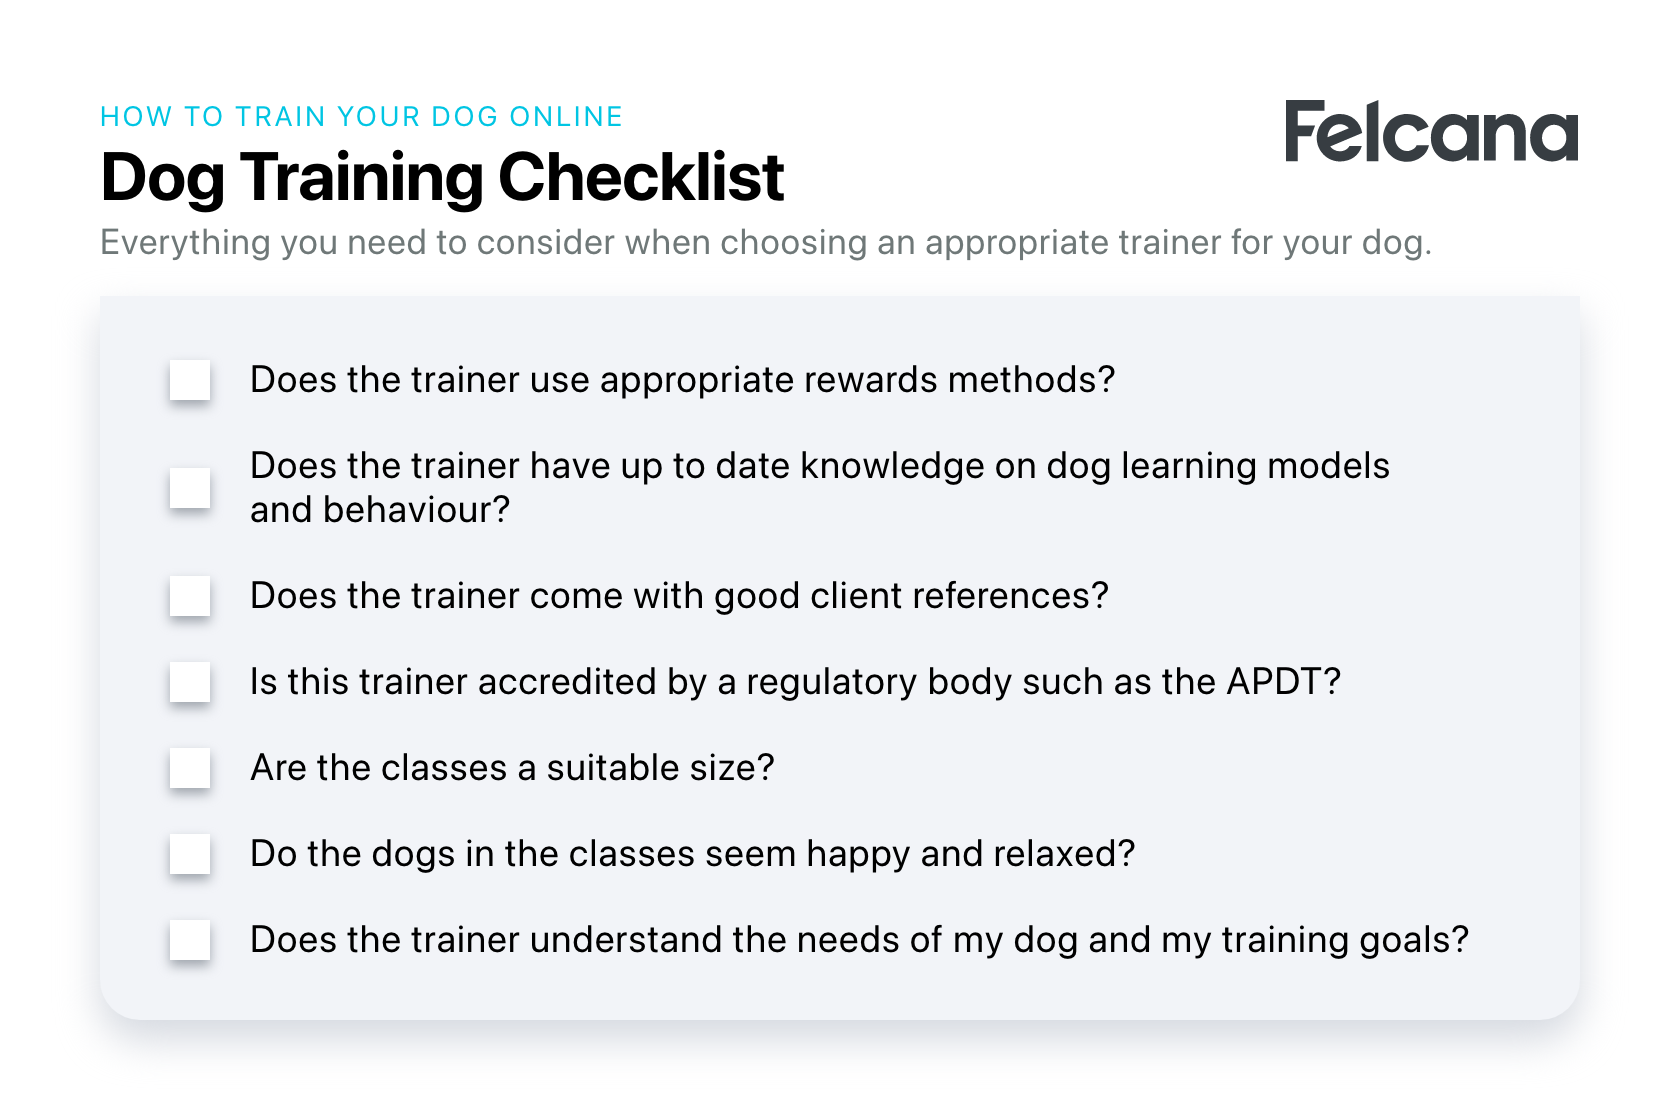 A comprehensive checklist of the key questions you should ask before choosing a dog trainer